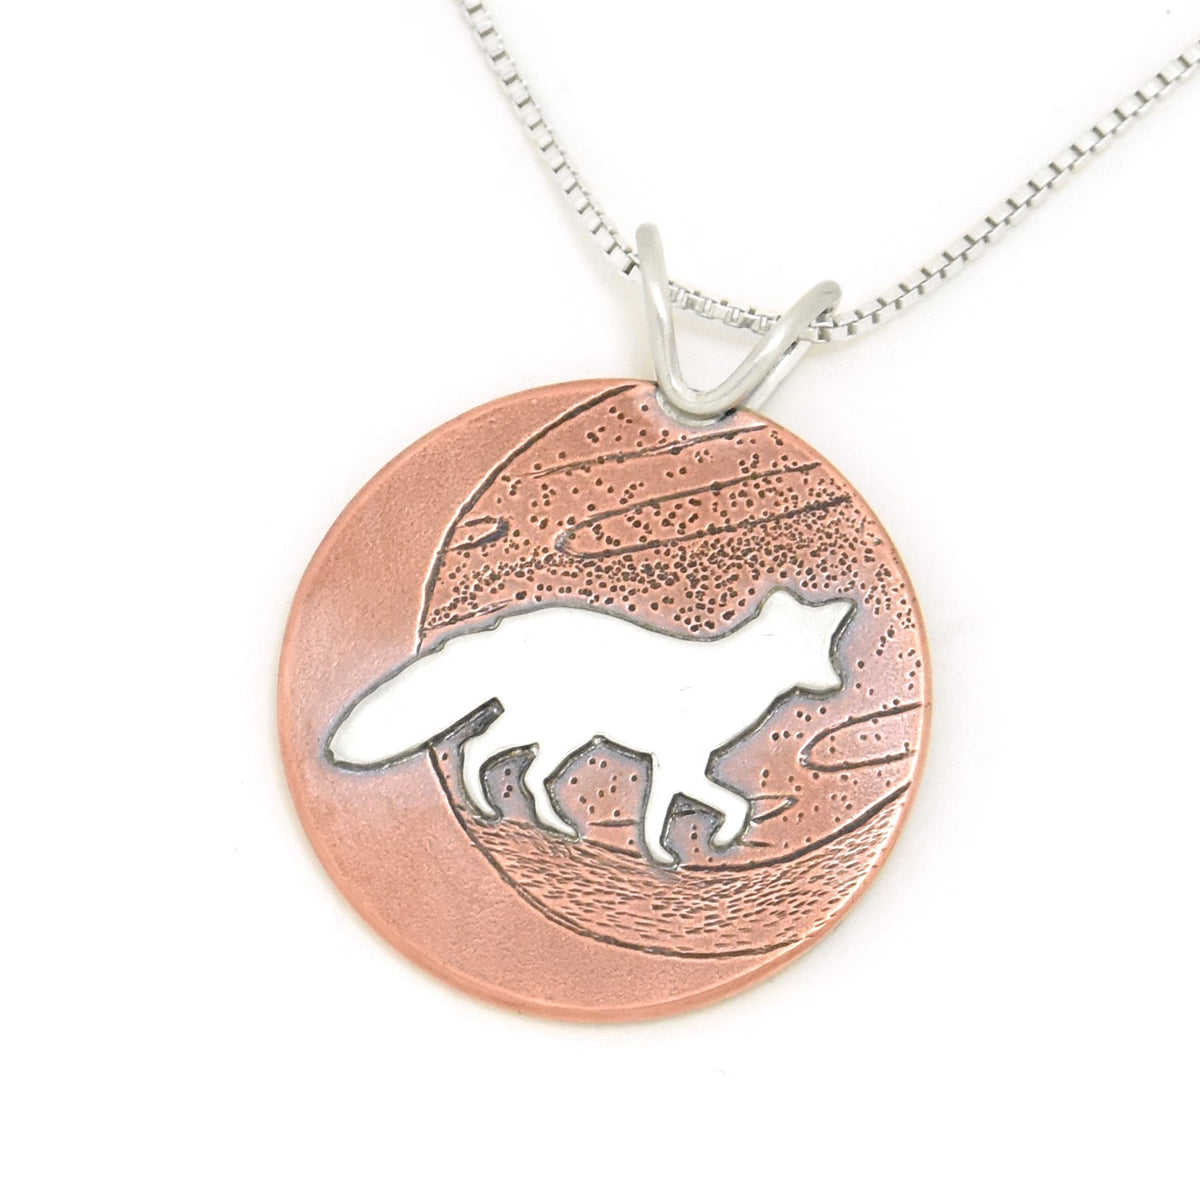 Silver Fox Under A Red Moon Pendant - Mixed Metal Pendant   6995 - handmade by Beth Millner Jewelry